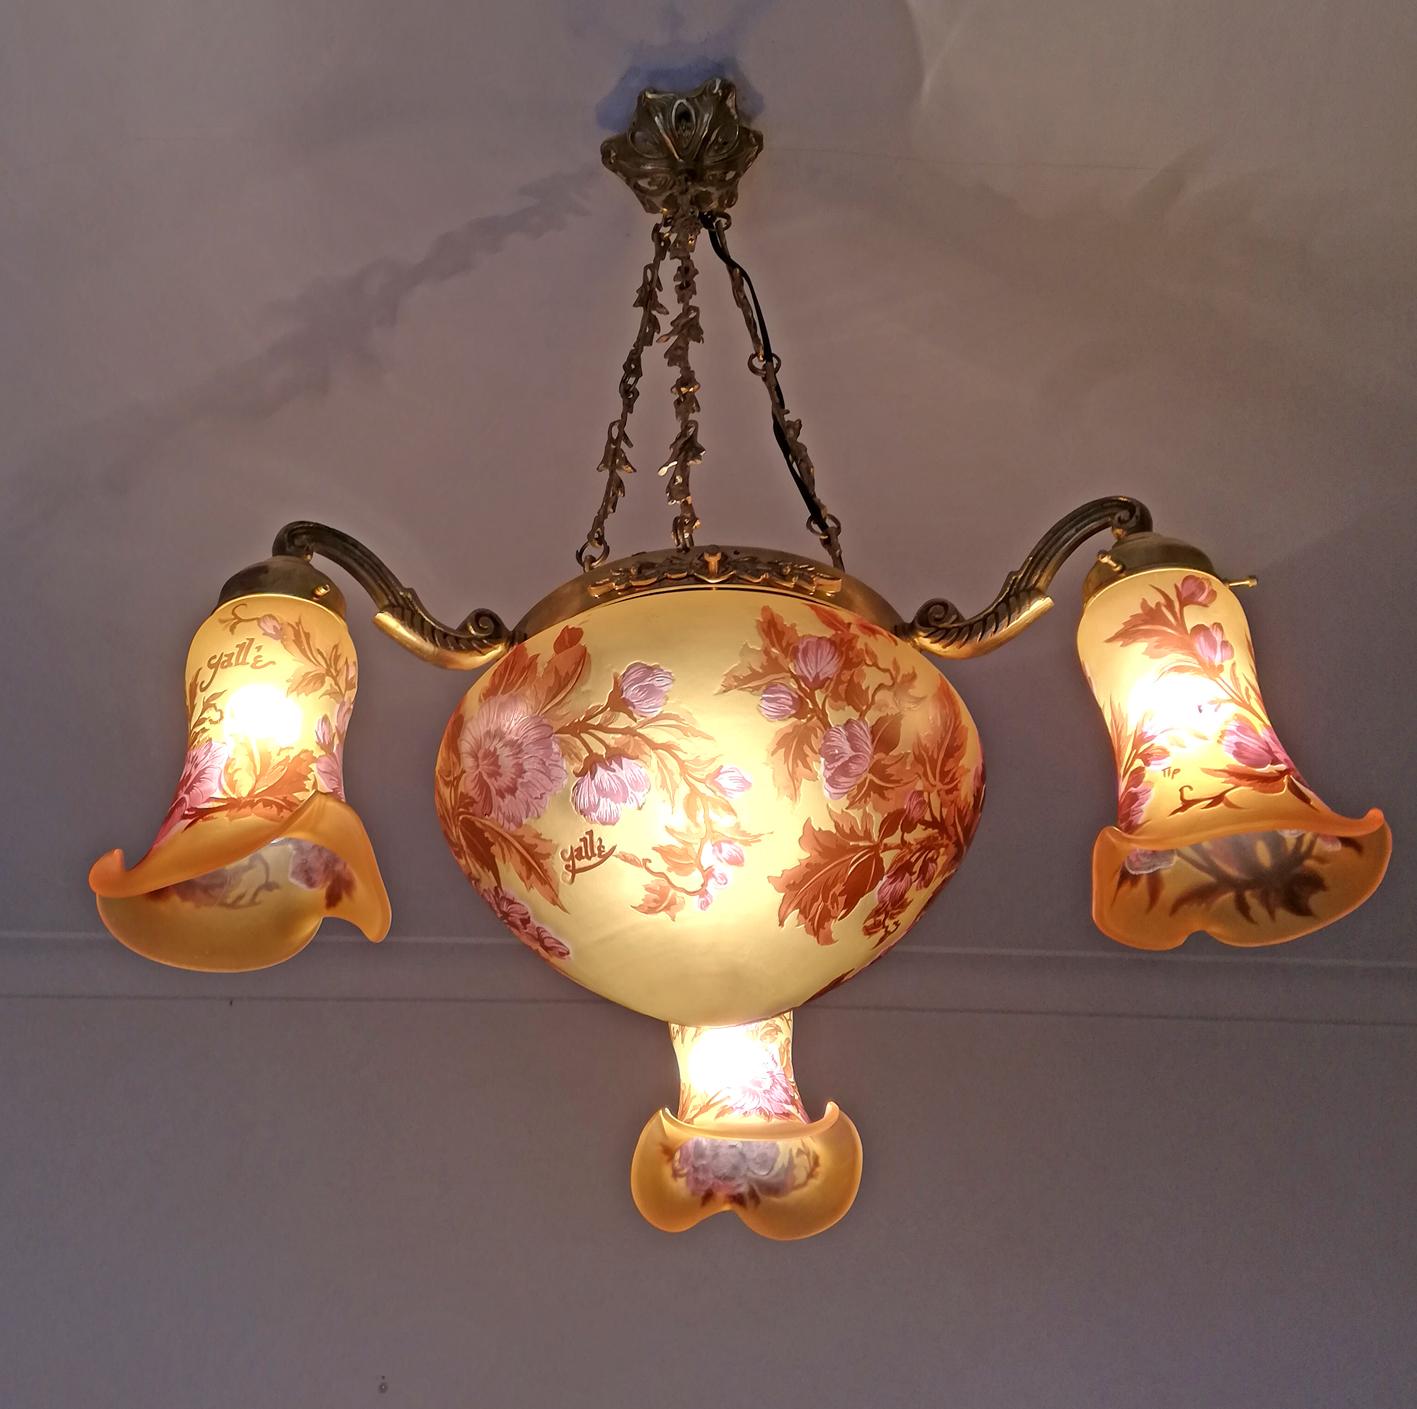 French Art Deco or Art Nouveau Amber and Pink Glass Gilt Chandelier Signed Gallé 1